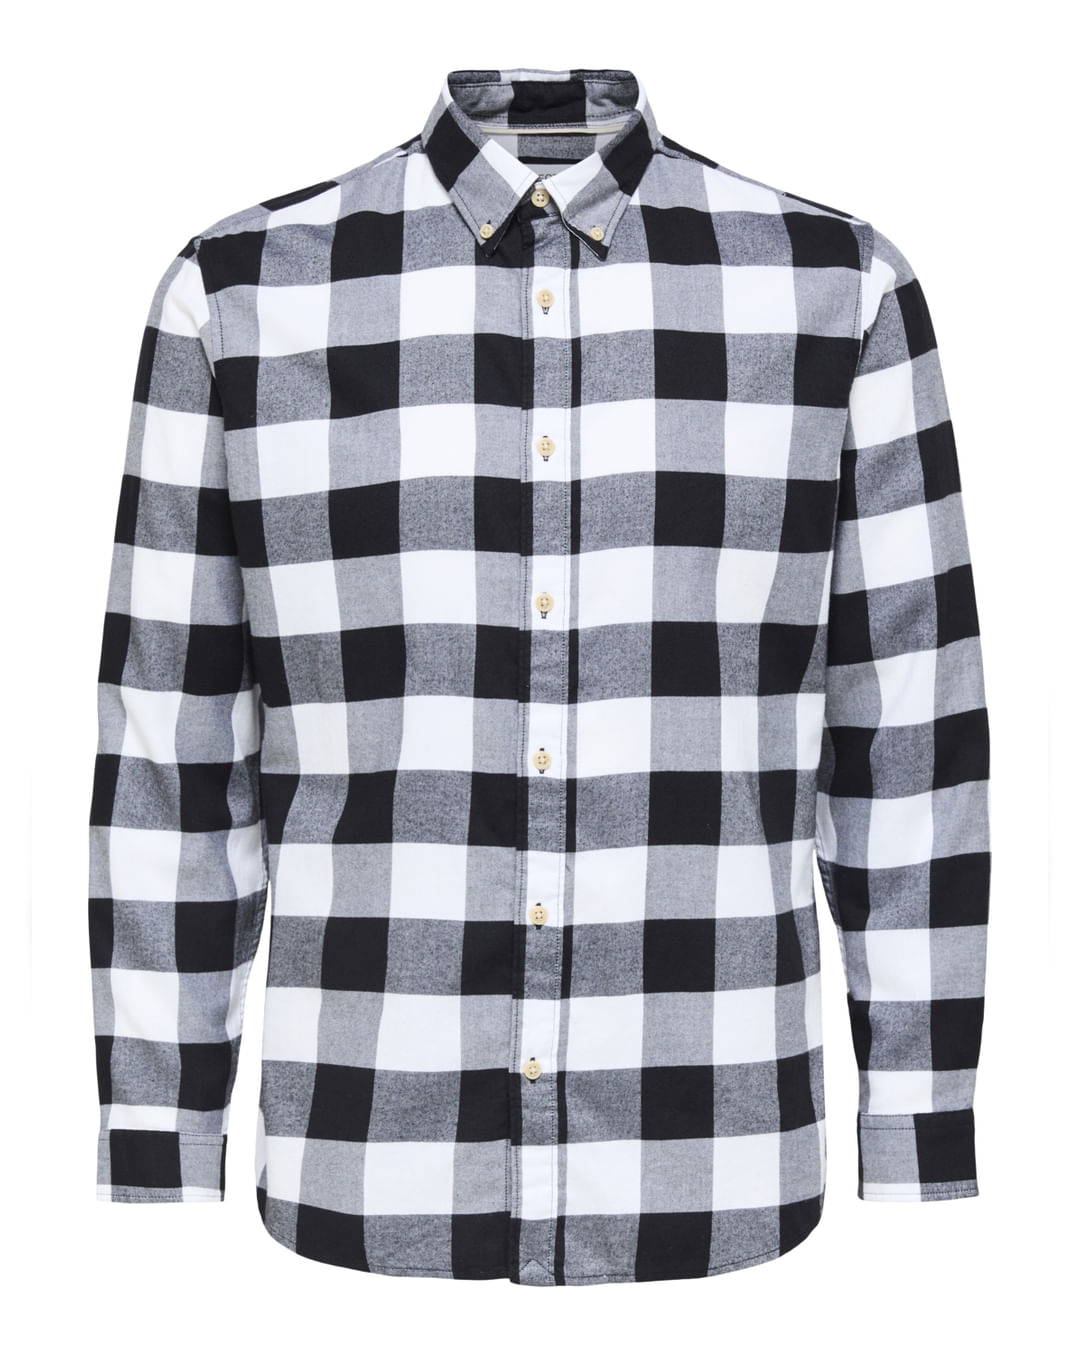 Black Flannel Checked Cotton Shirt|284714702